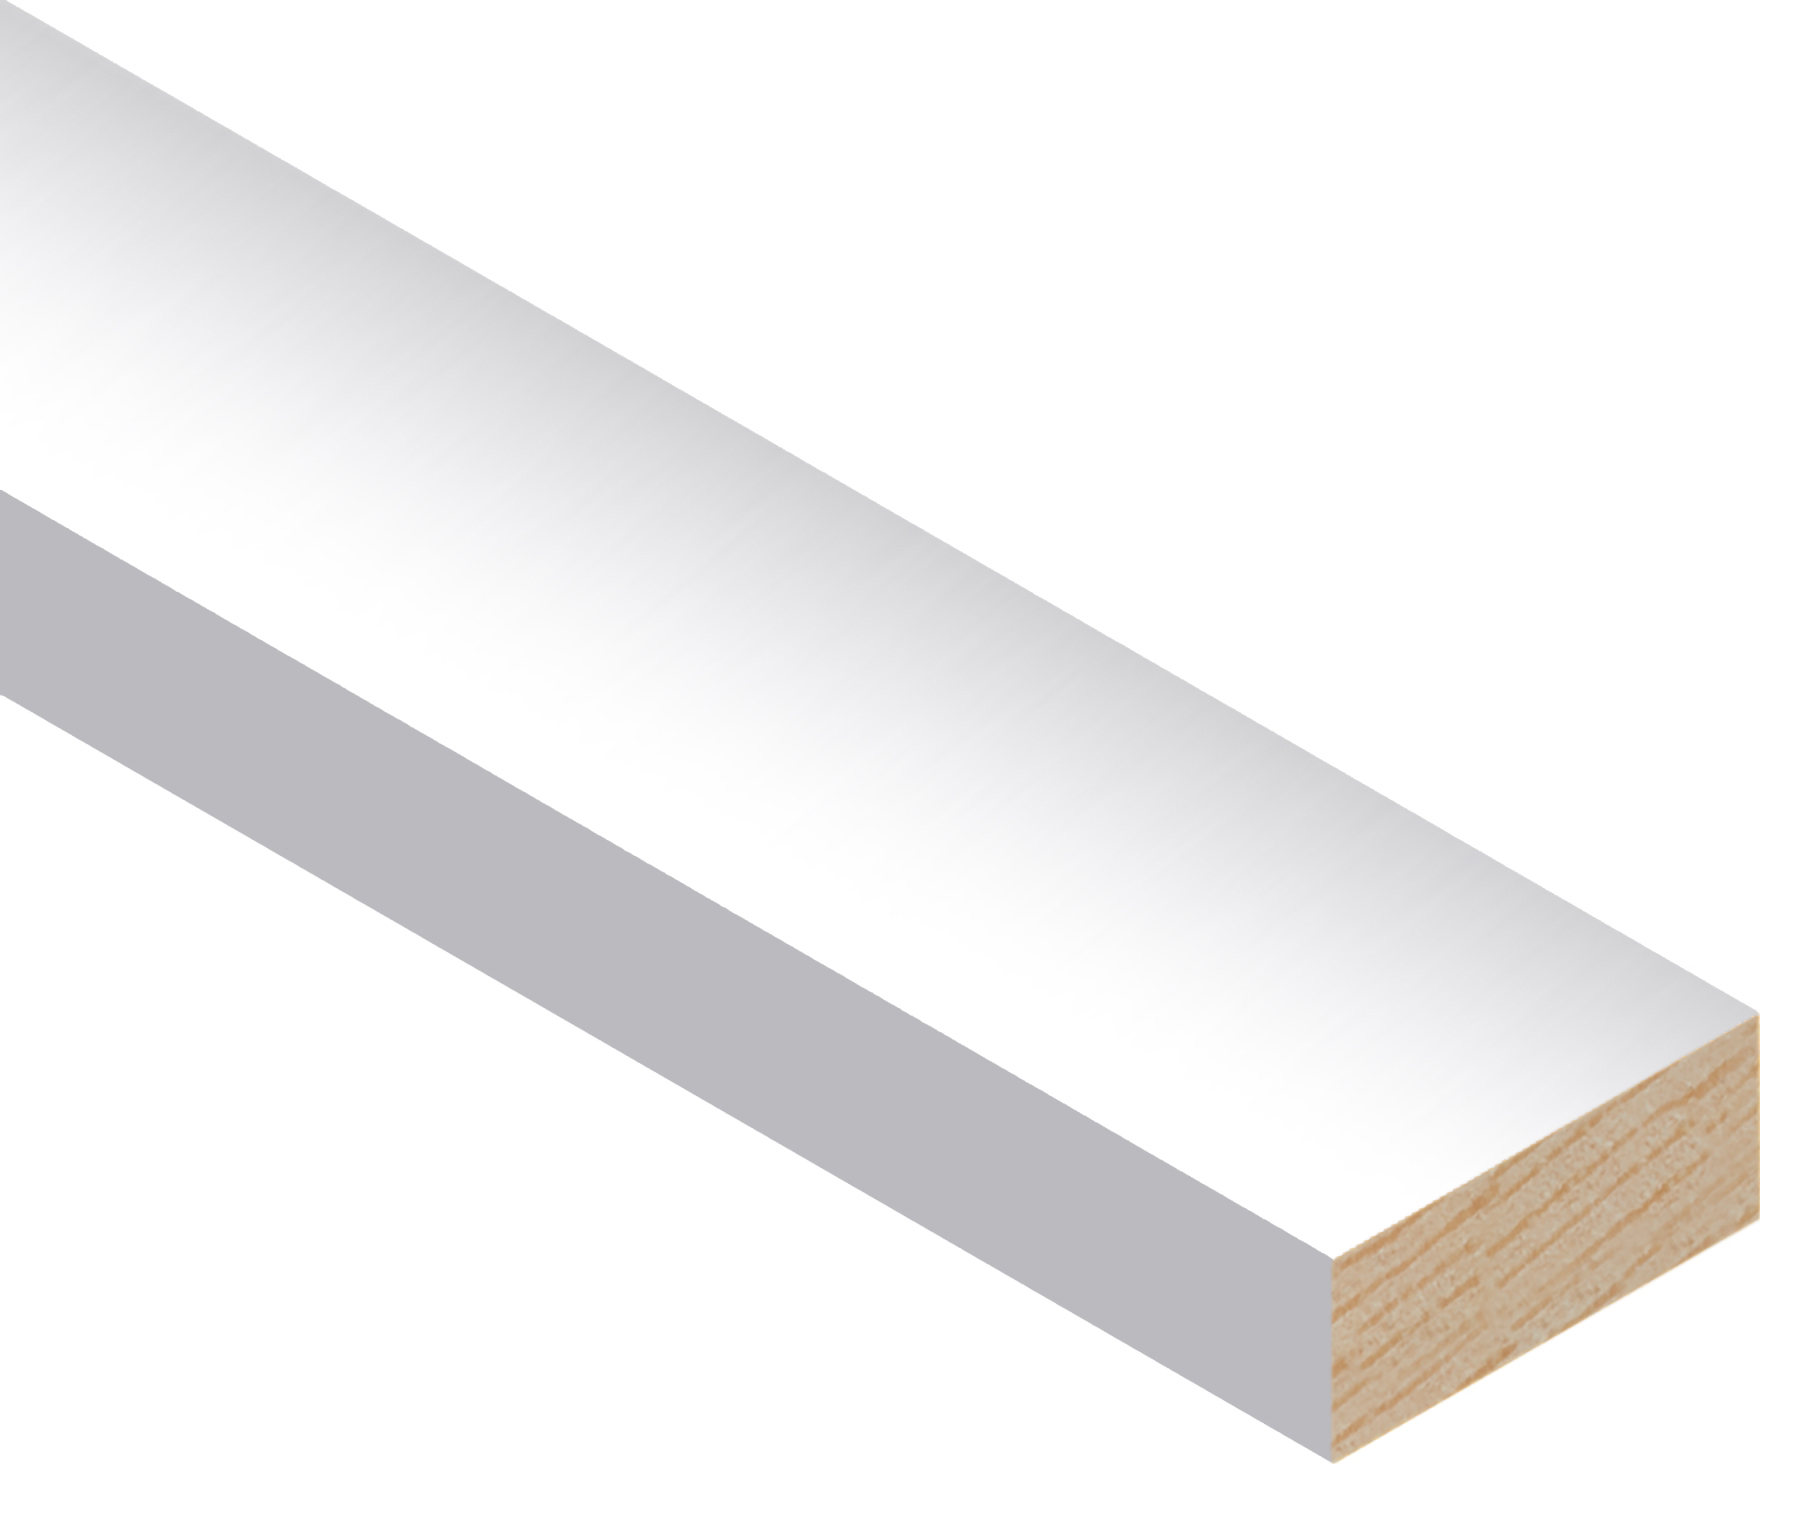 Cheshire Mouldings Primed Stripwood - 15x36x2400mm